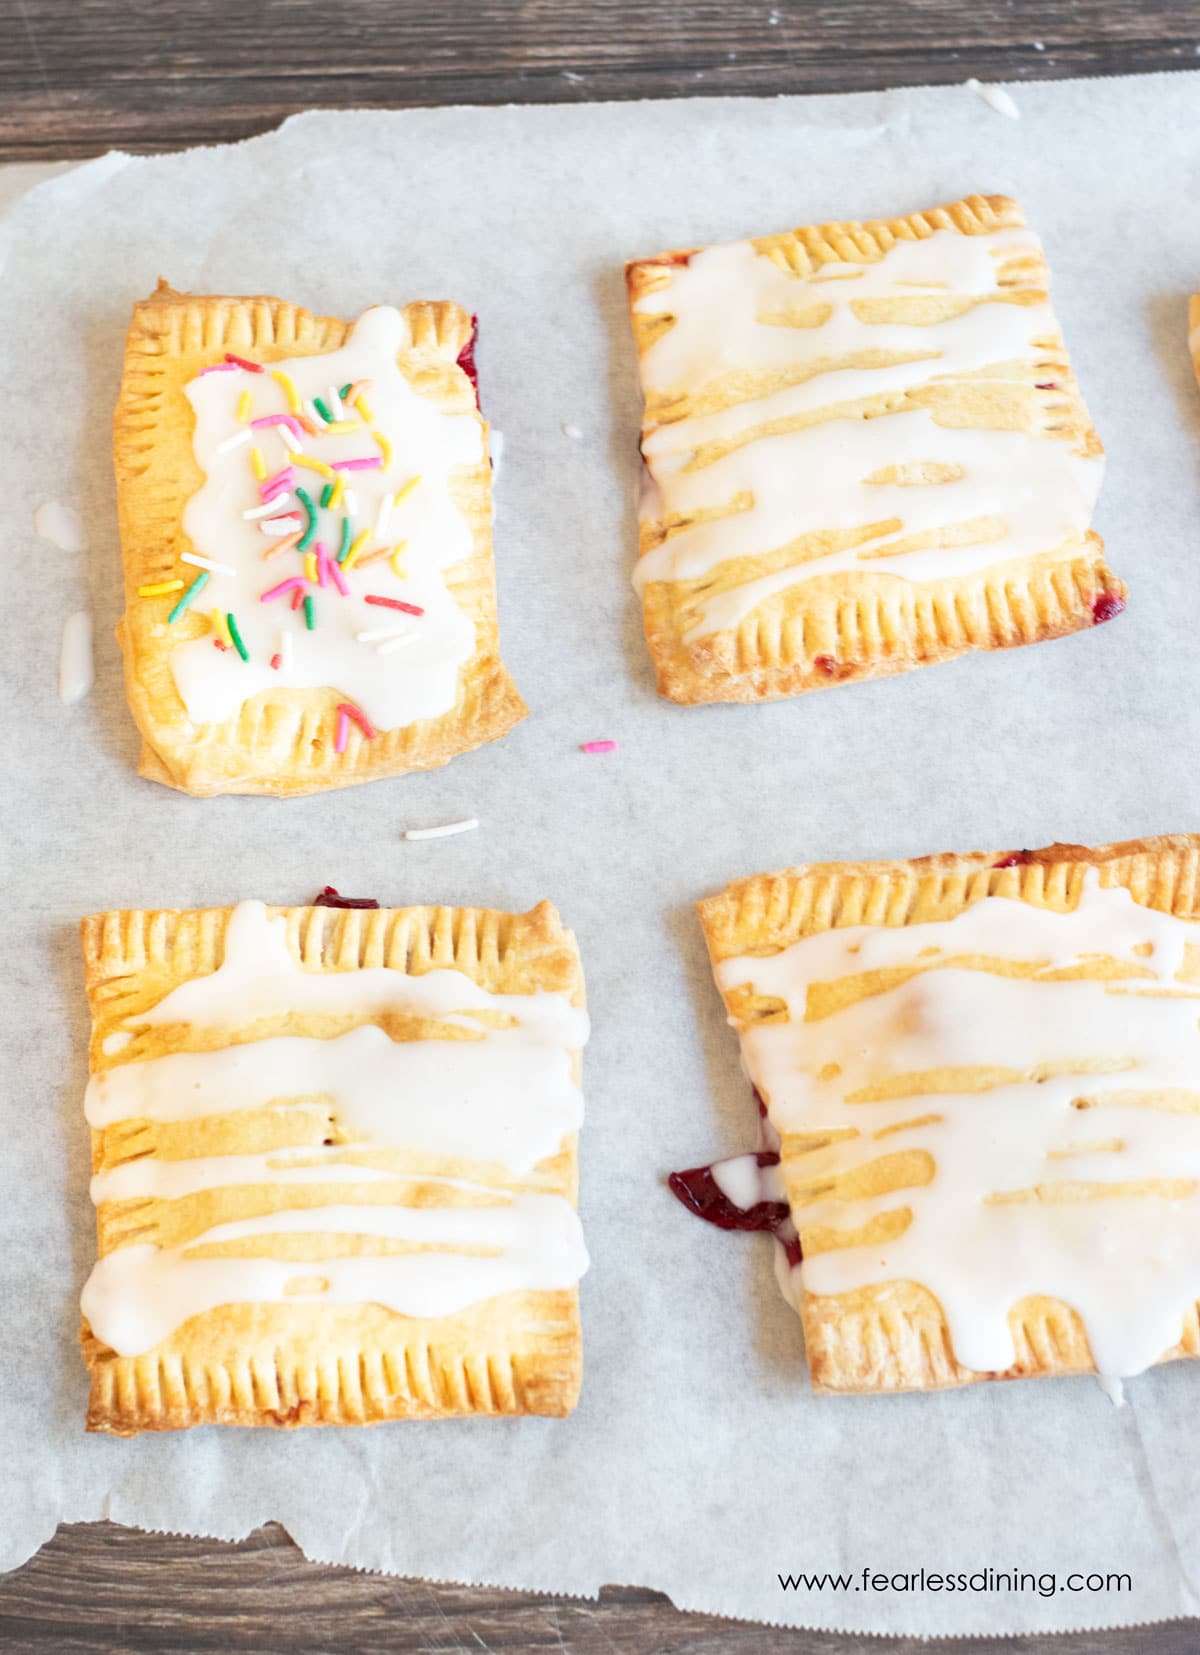 Frosted gluten free pop tarts on parchment paper.